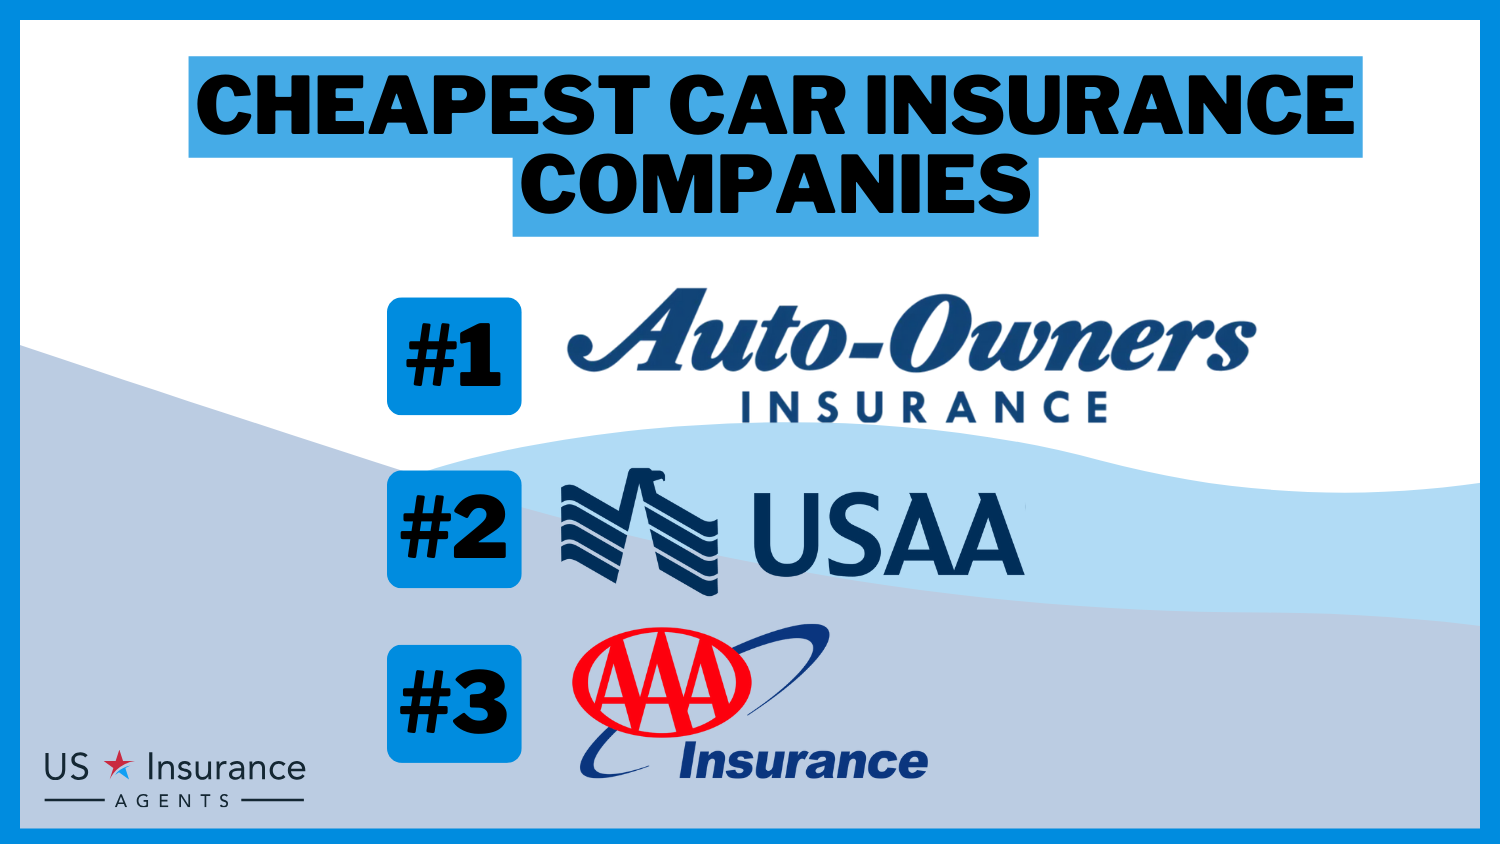 10 Cheapest Car Insurance Companies: Auto-Owners, USAA, and AAA